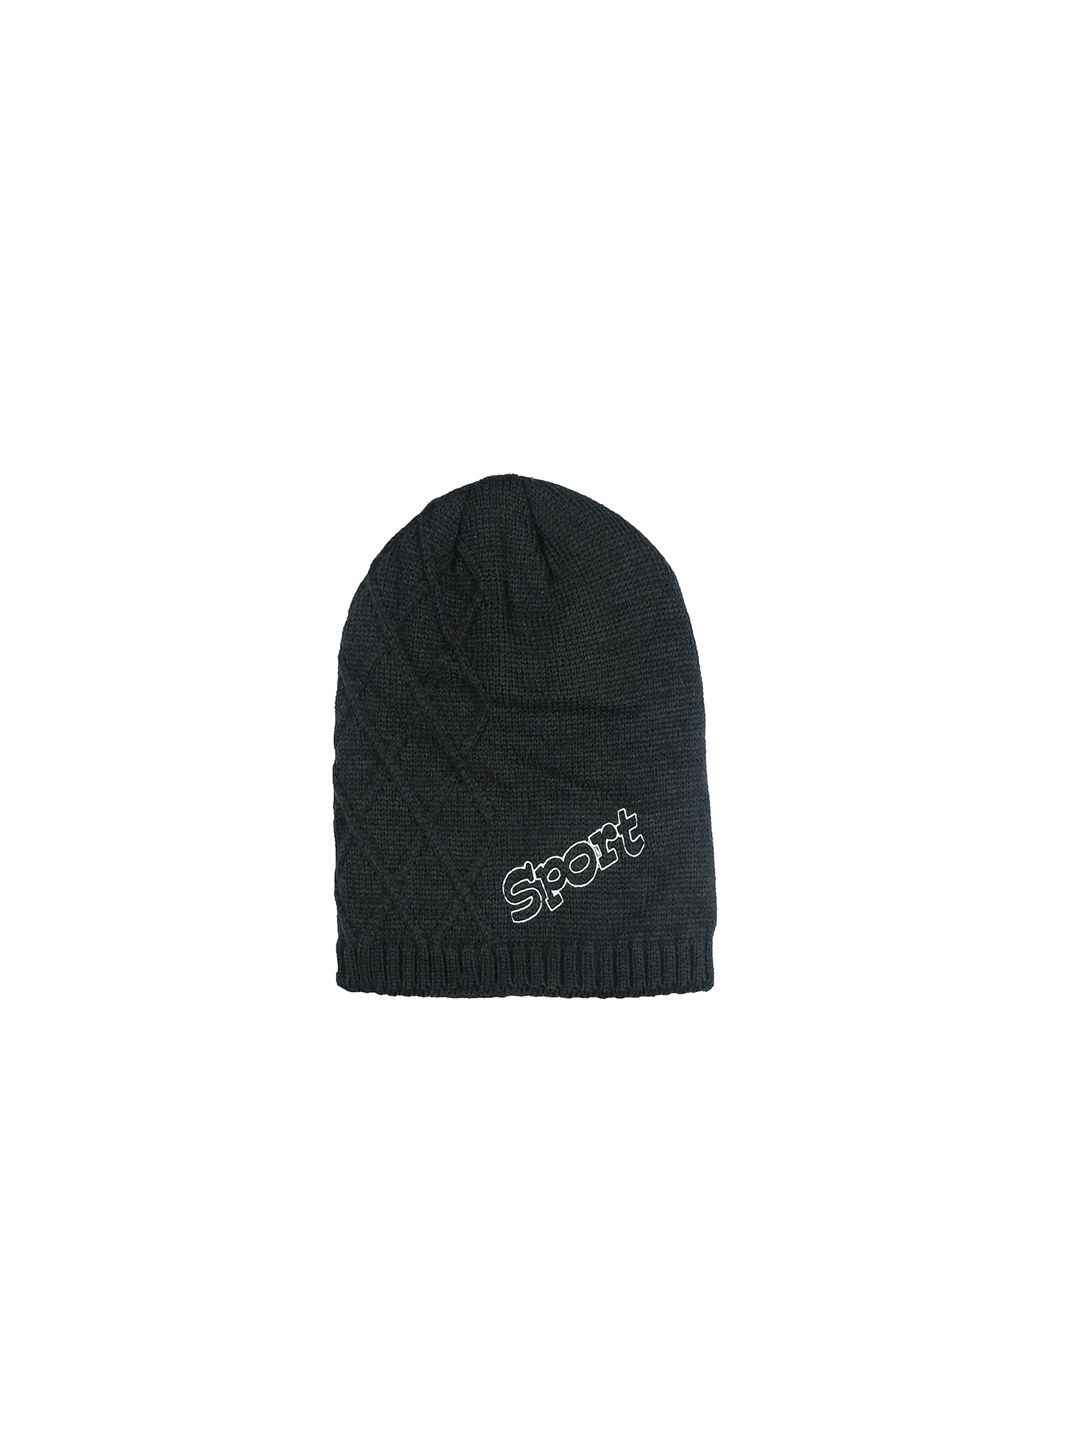 iSWEVEN Unisex Black Printed Beanie Price in India